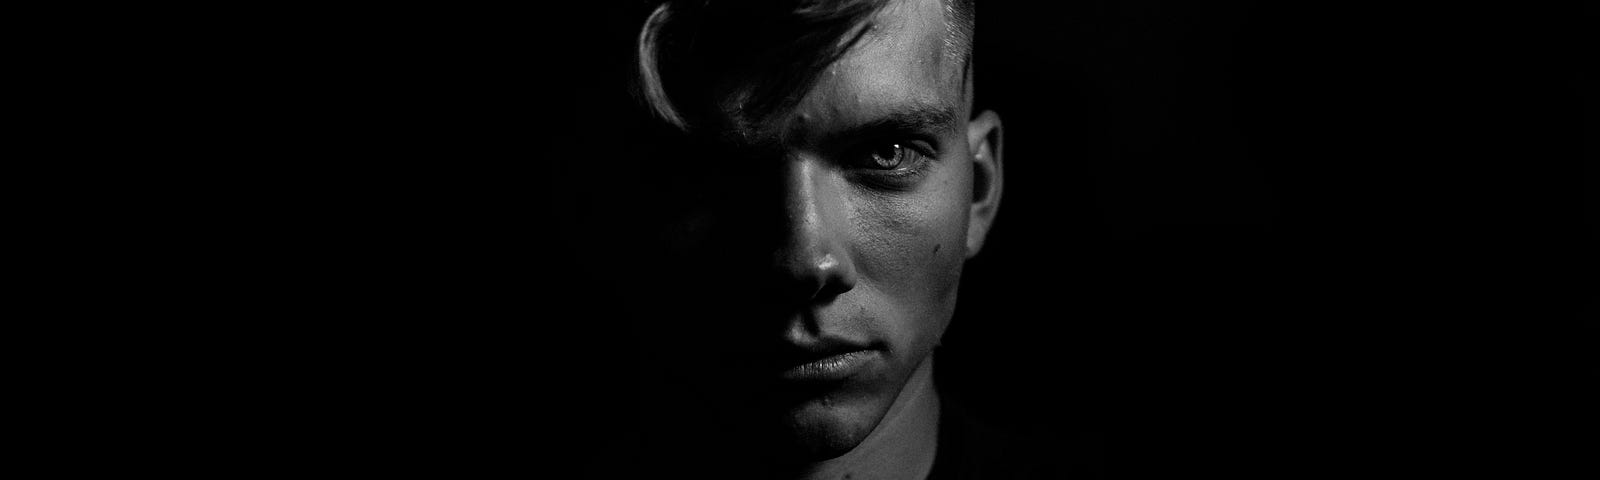 An image of an angular blond-haired male with an intense stare directed at the camera, half his face is cast in shadow, with a black backdrop.